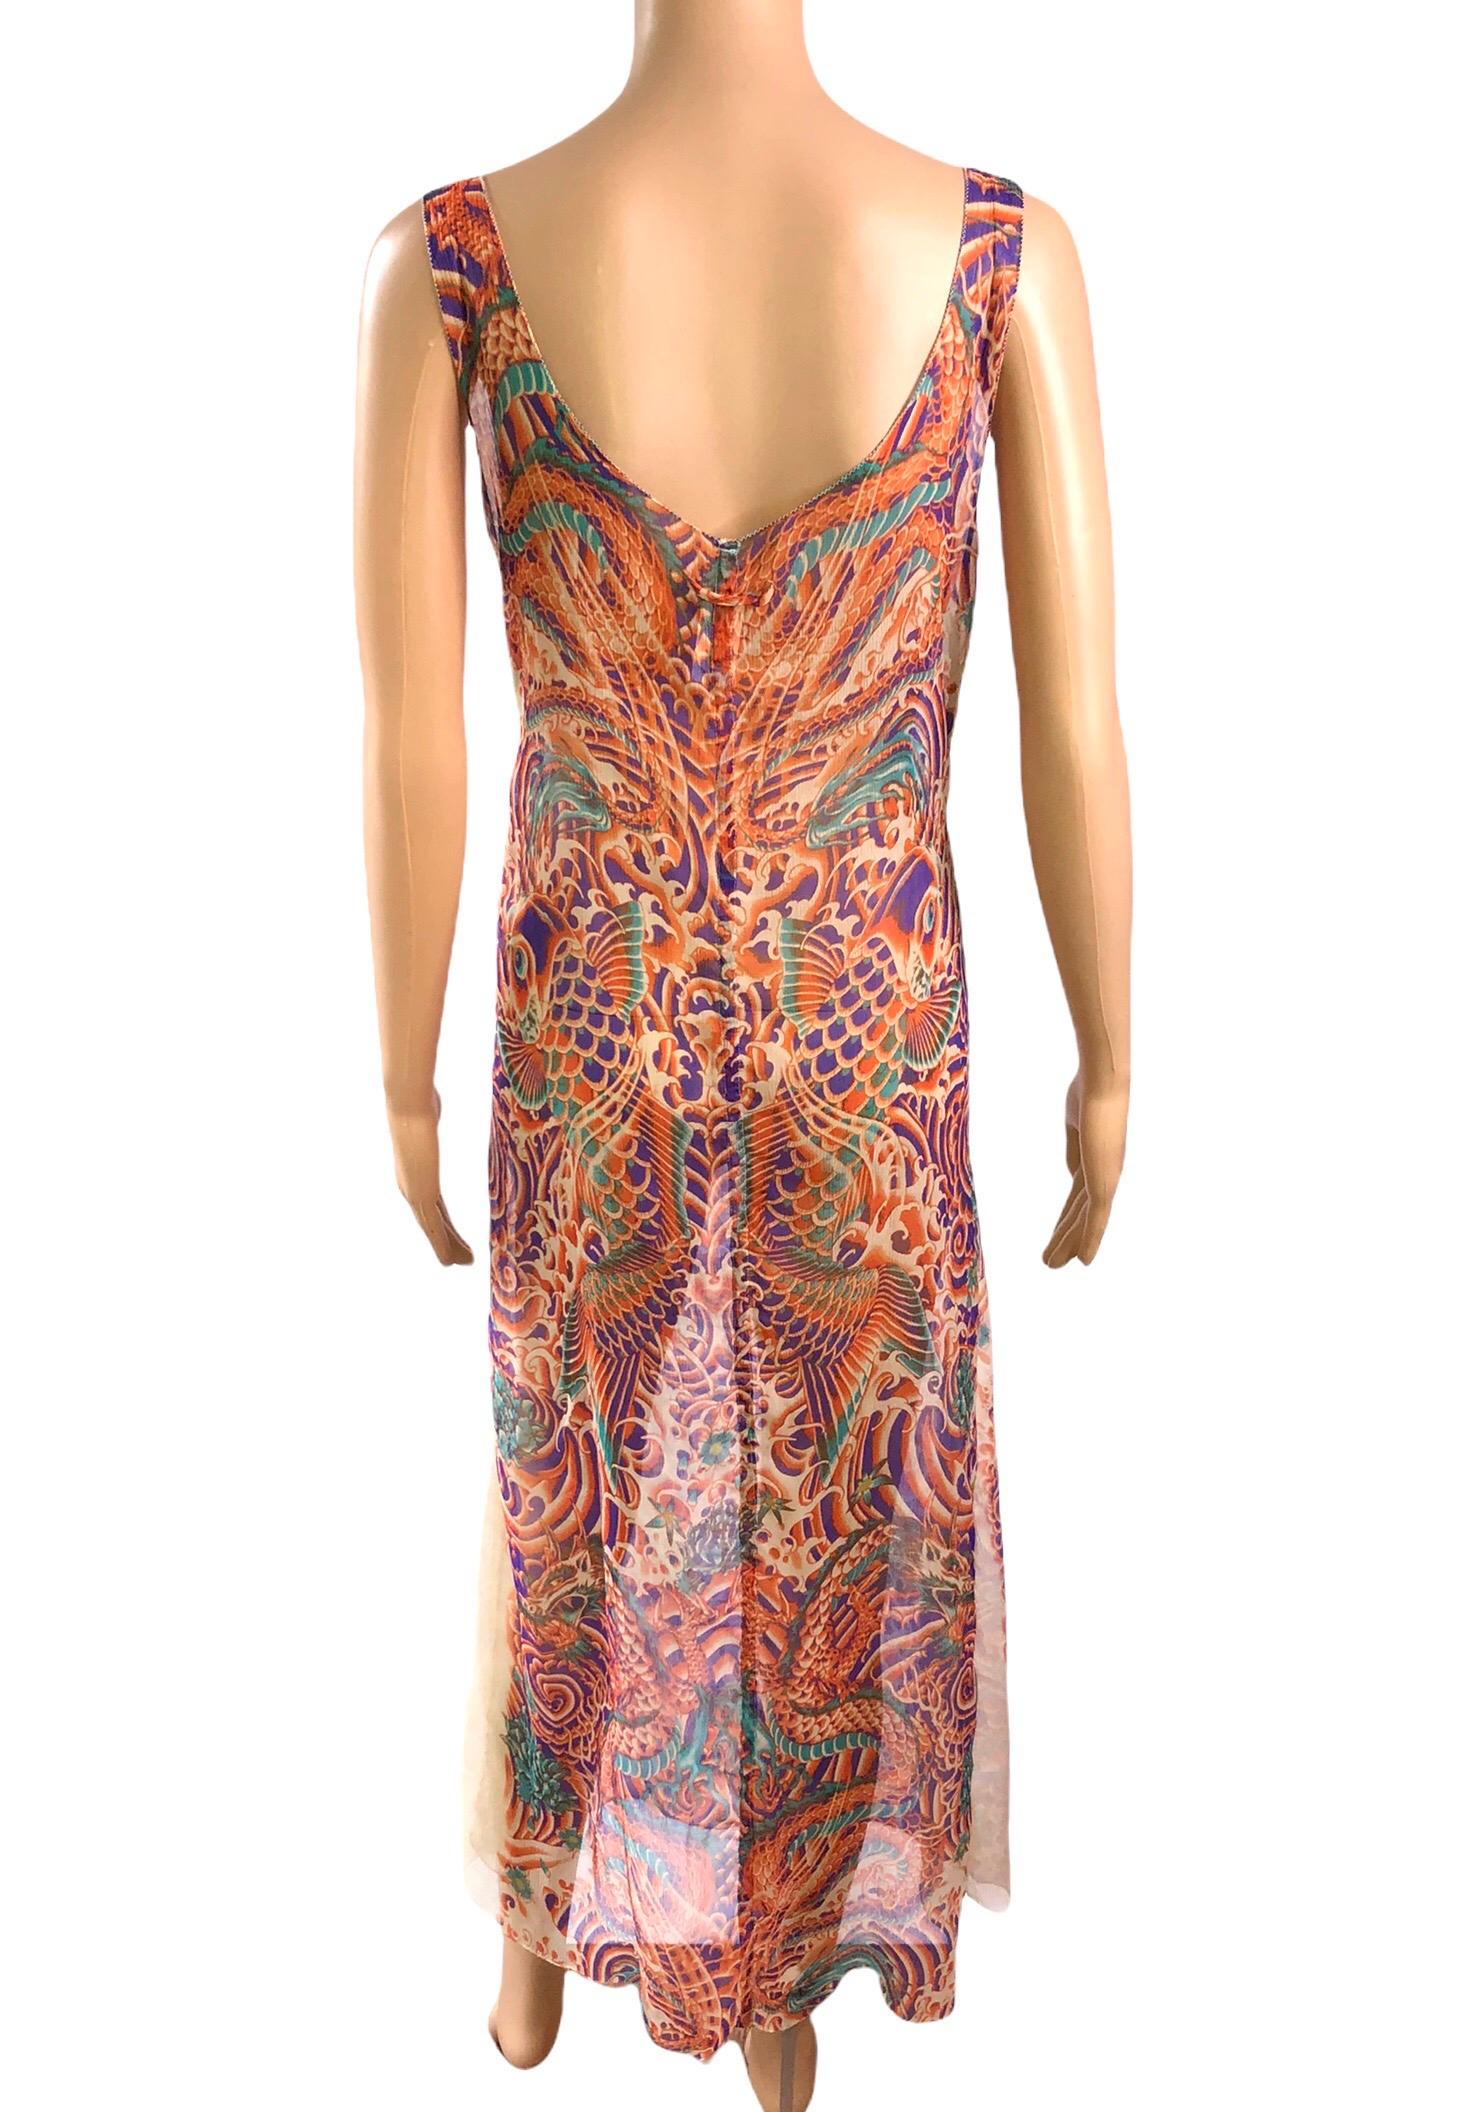 Jean Paul Gaultier Soleil S/S 2009 Tattoo Print Sheer Maxi Dress In Good Condition In Naples, FL